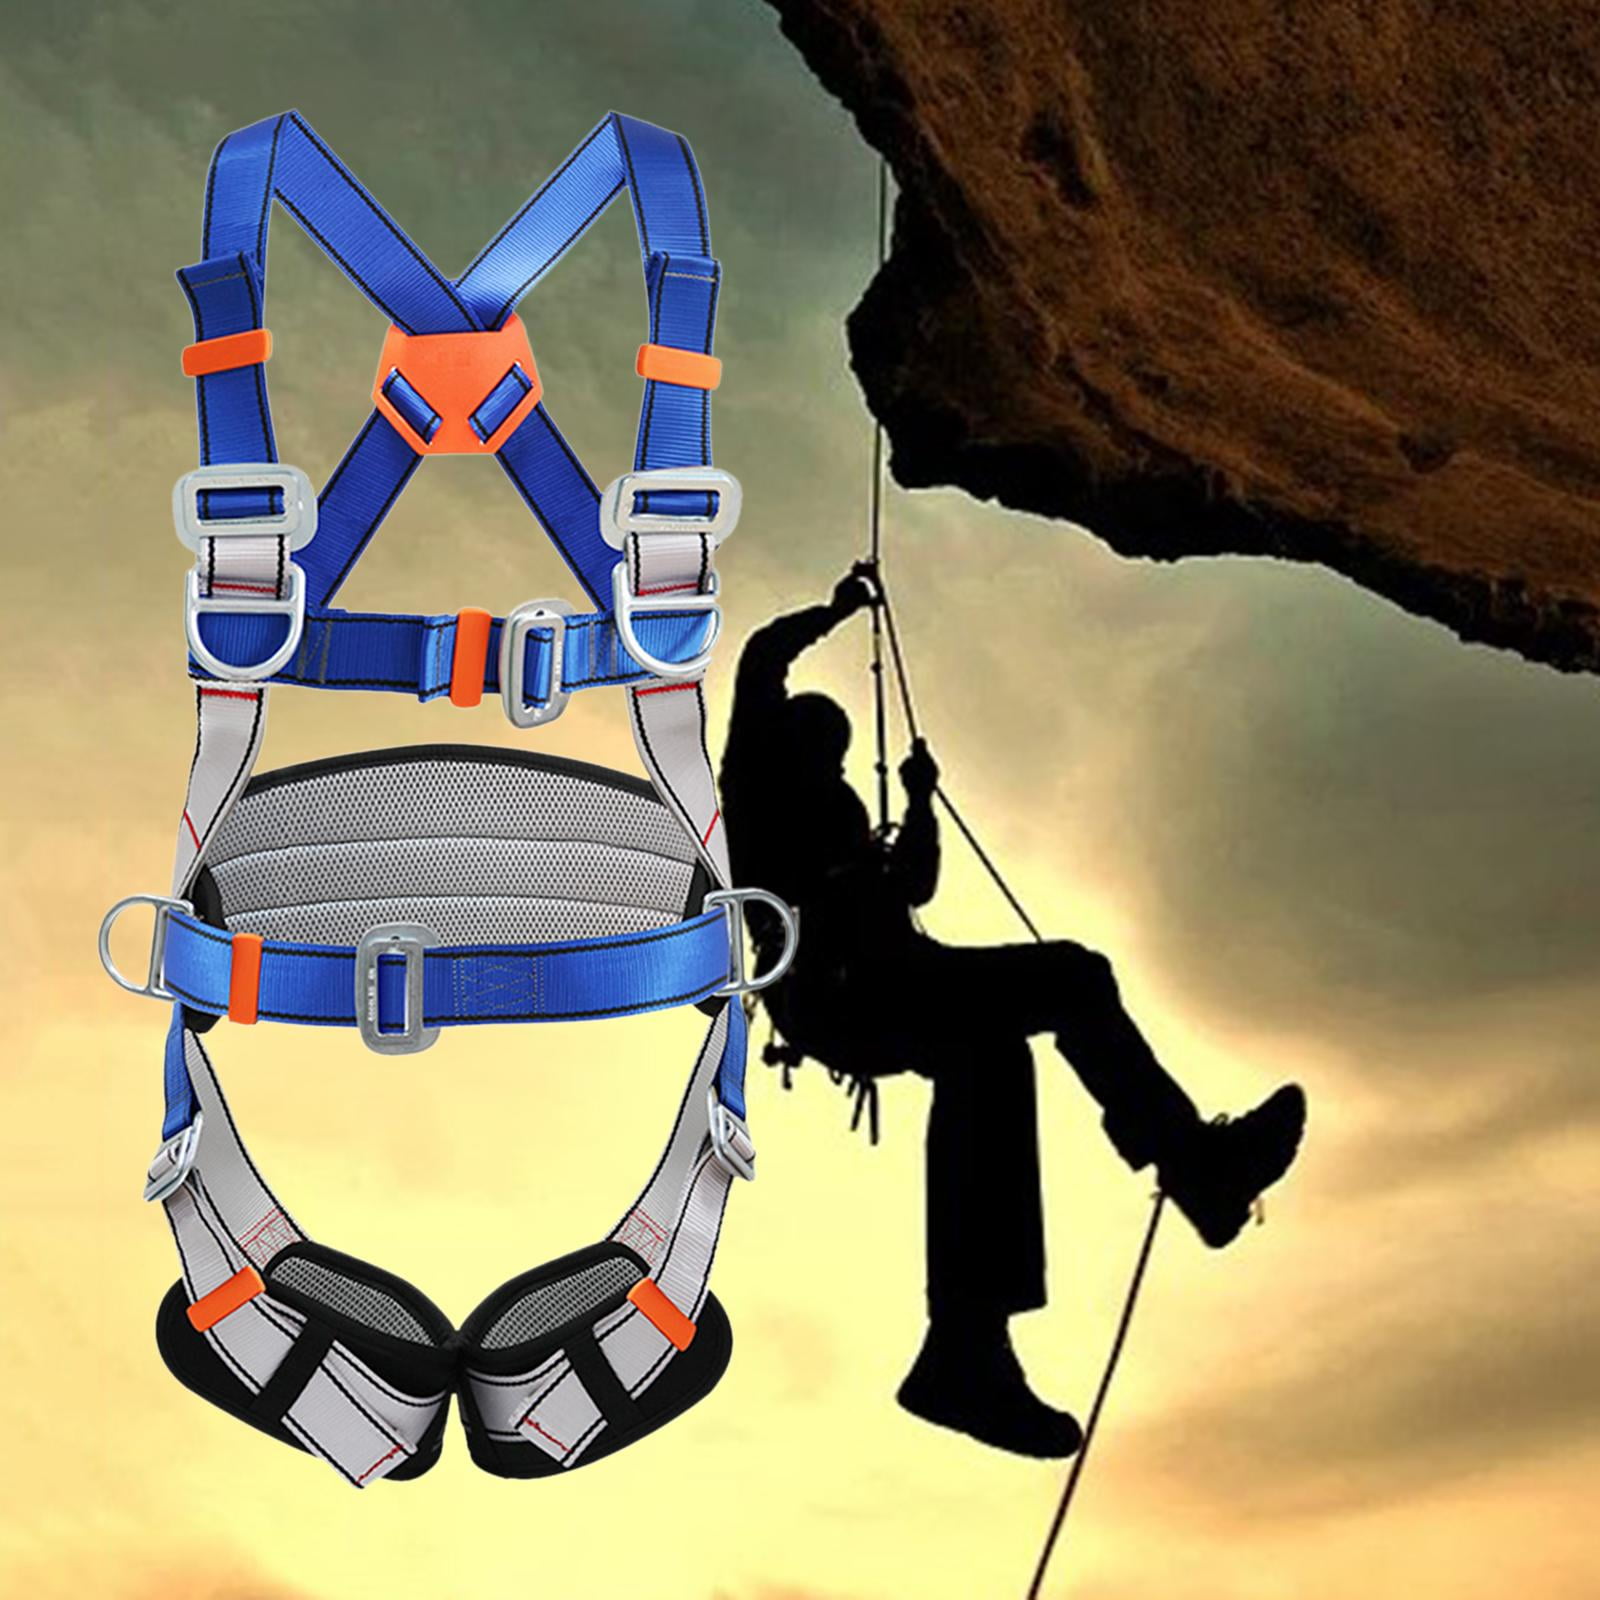 Outdoor Climbing Harness, Full Body Safety Harness Belt for Outdoor Tree Climbing  Harness, Tree Working Safety for Women Men Kids - Blue Gray 